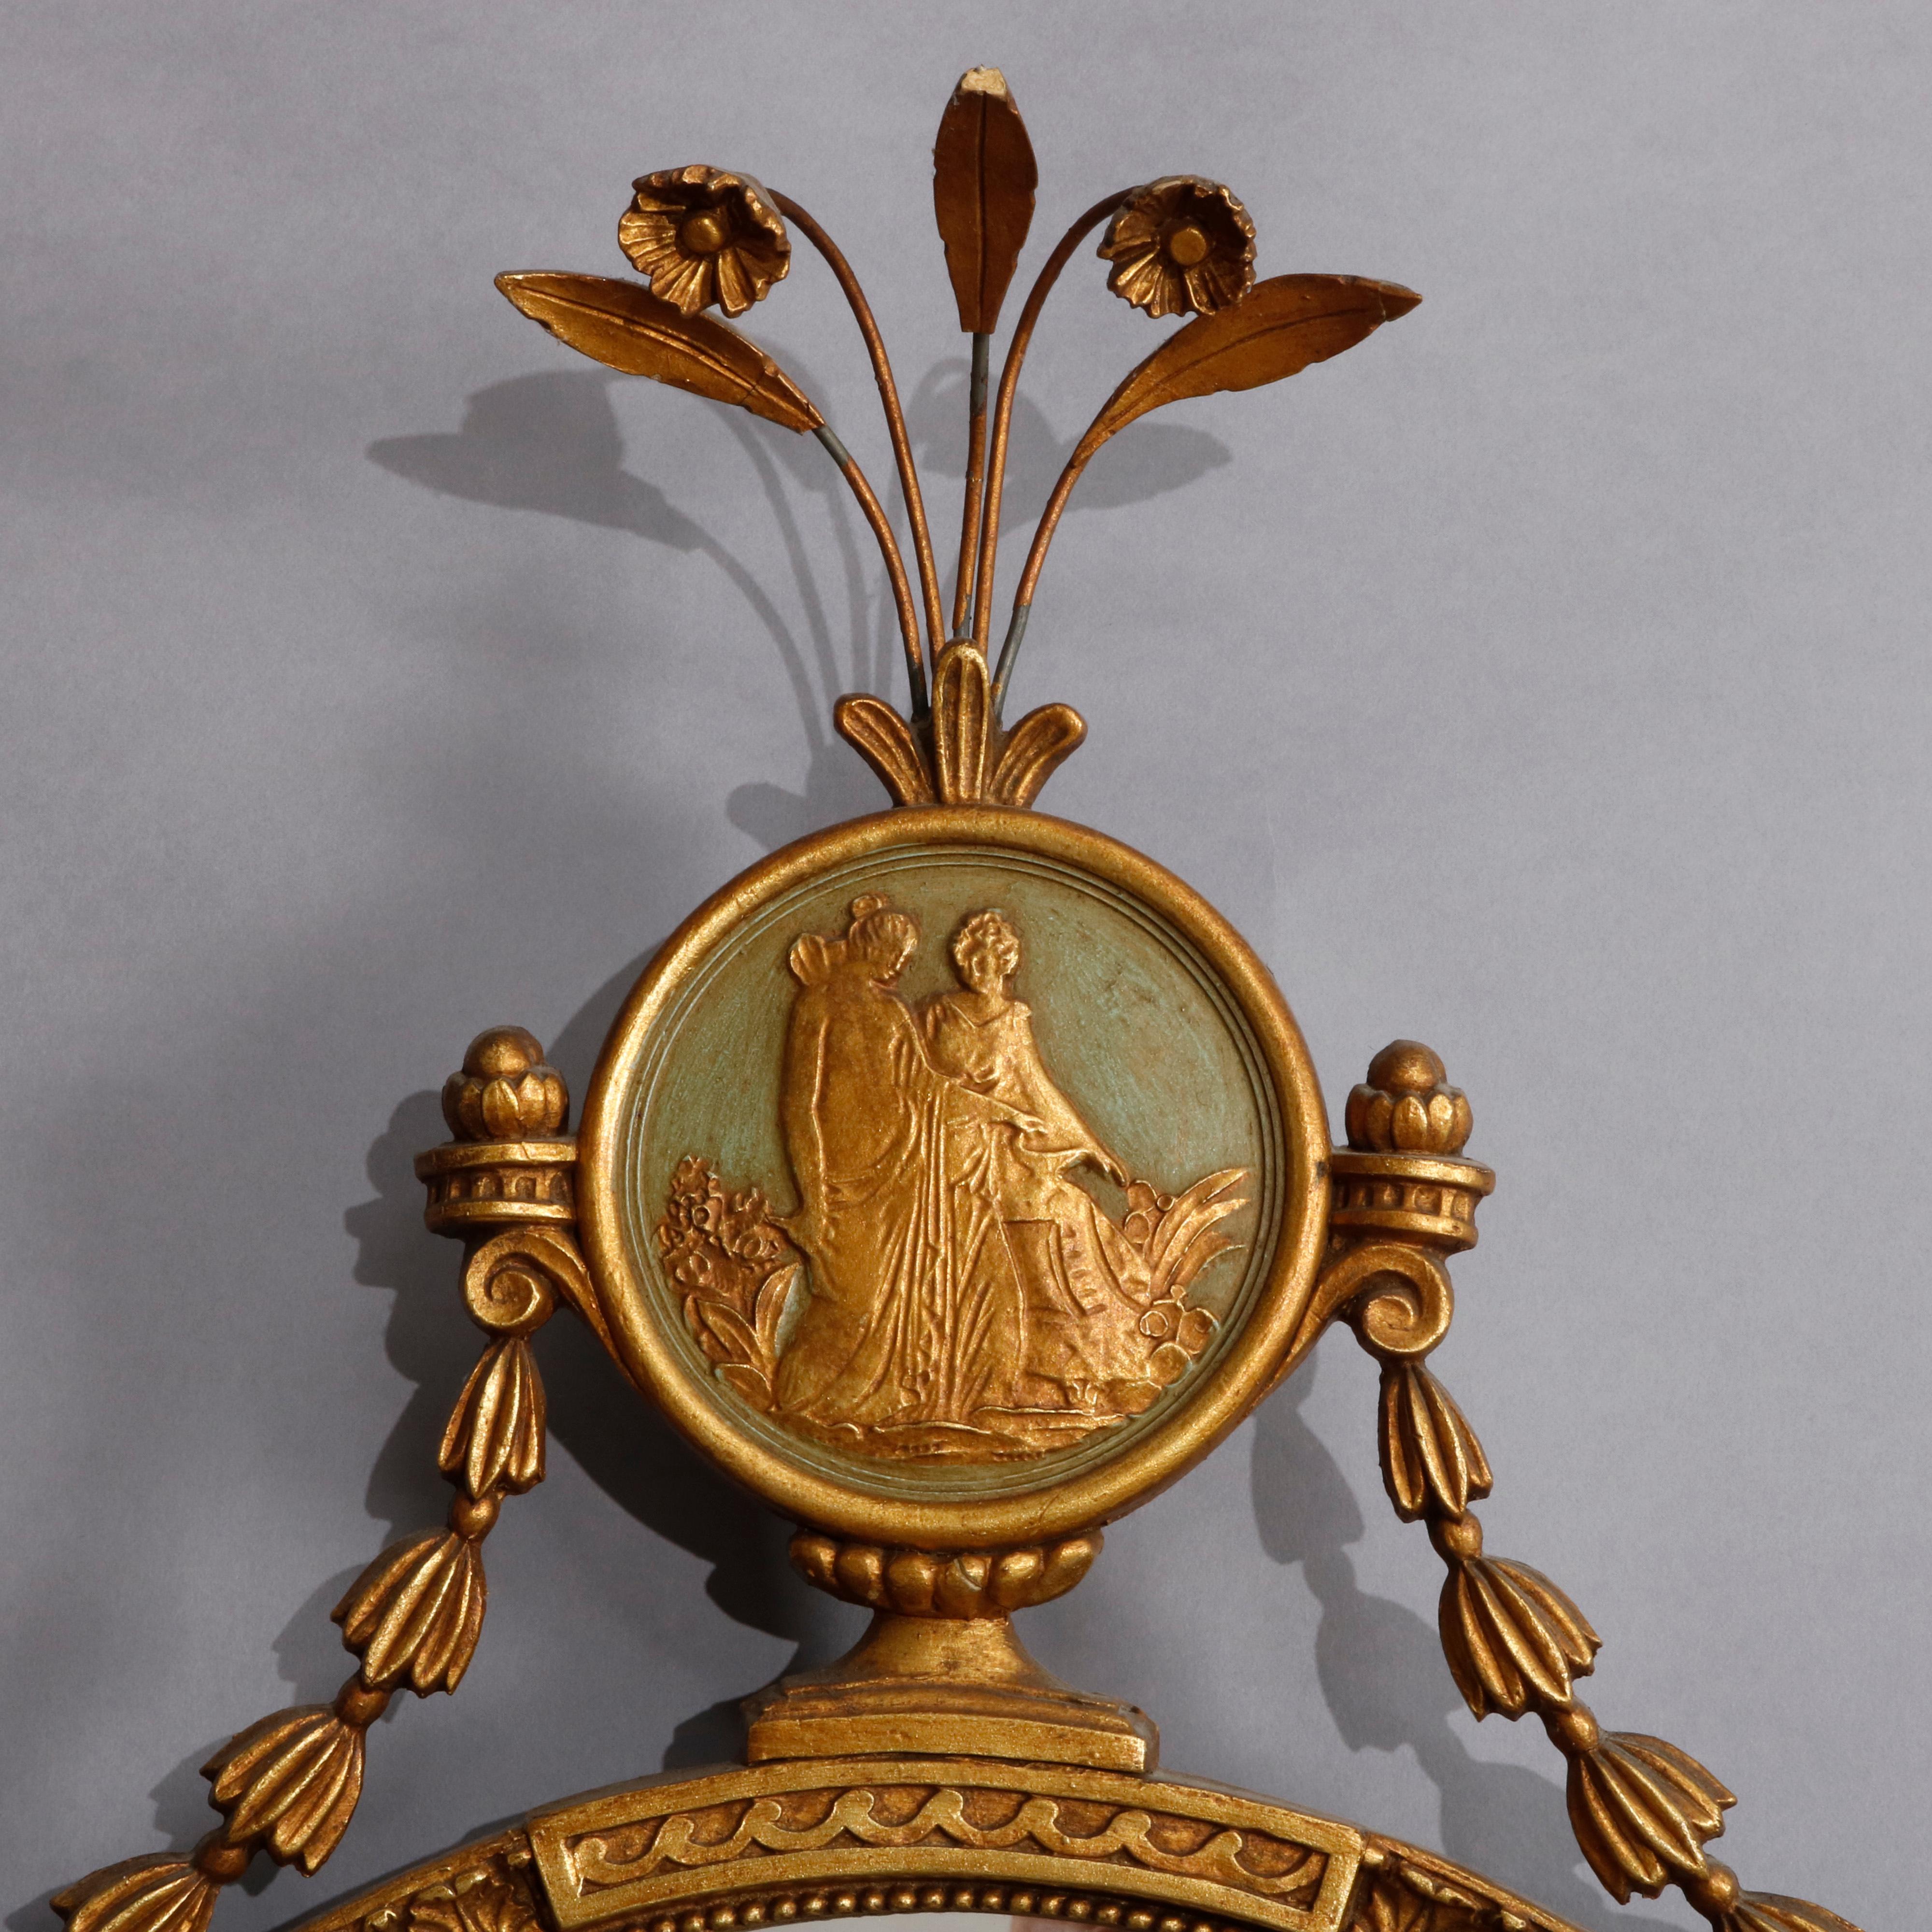 An antique Adam style wall mirror features foliate crest surmounting polychromed medallion with classical scene and oval mirror having flanking bellflower drape, circa 1919

Measures: 43.75